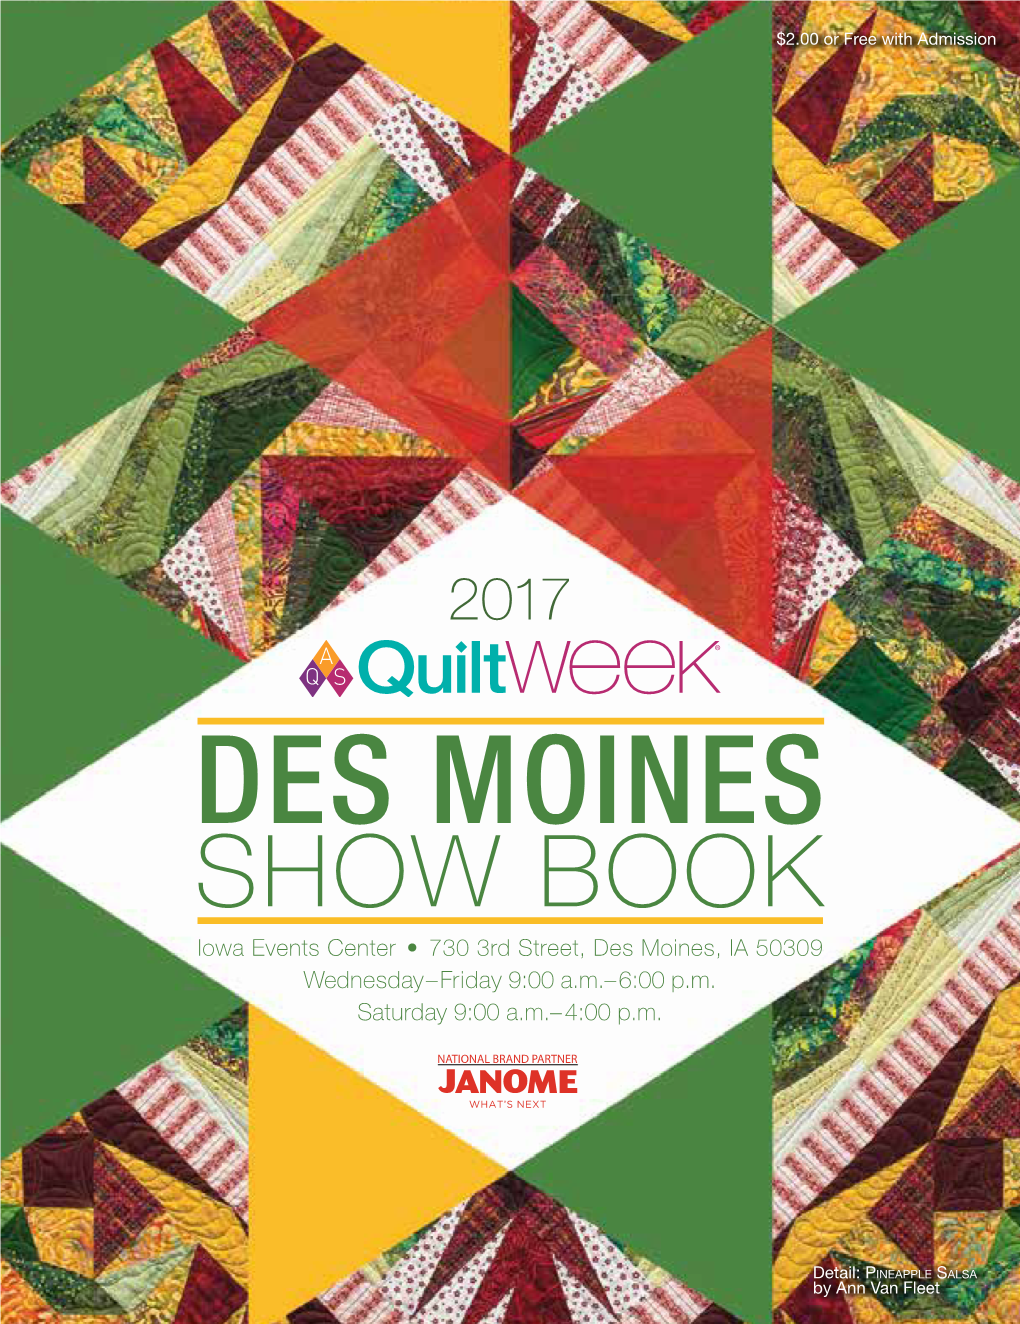 SHOW BOOK Iowa Events Center • 730 3Rd Street, Des Moines, IA 50309 Wednesday–Friday 9:00 A.M.–6:00 P.M